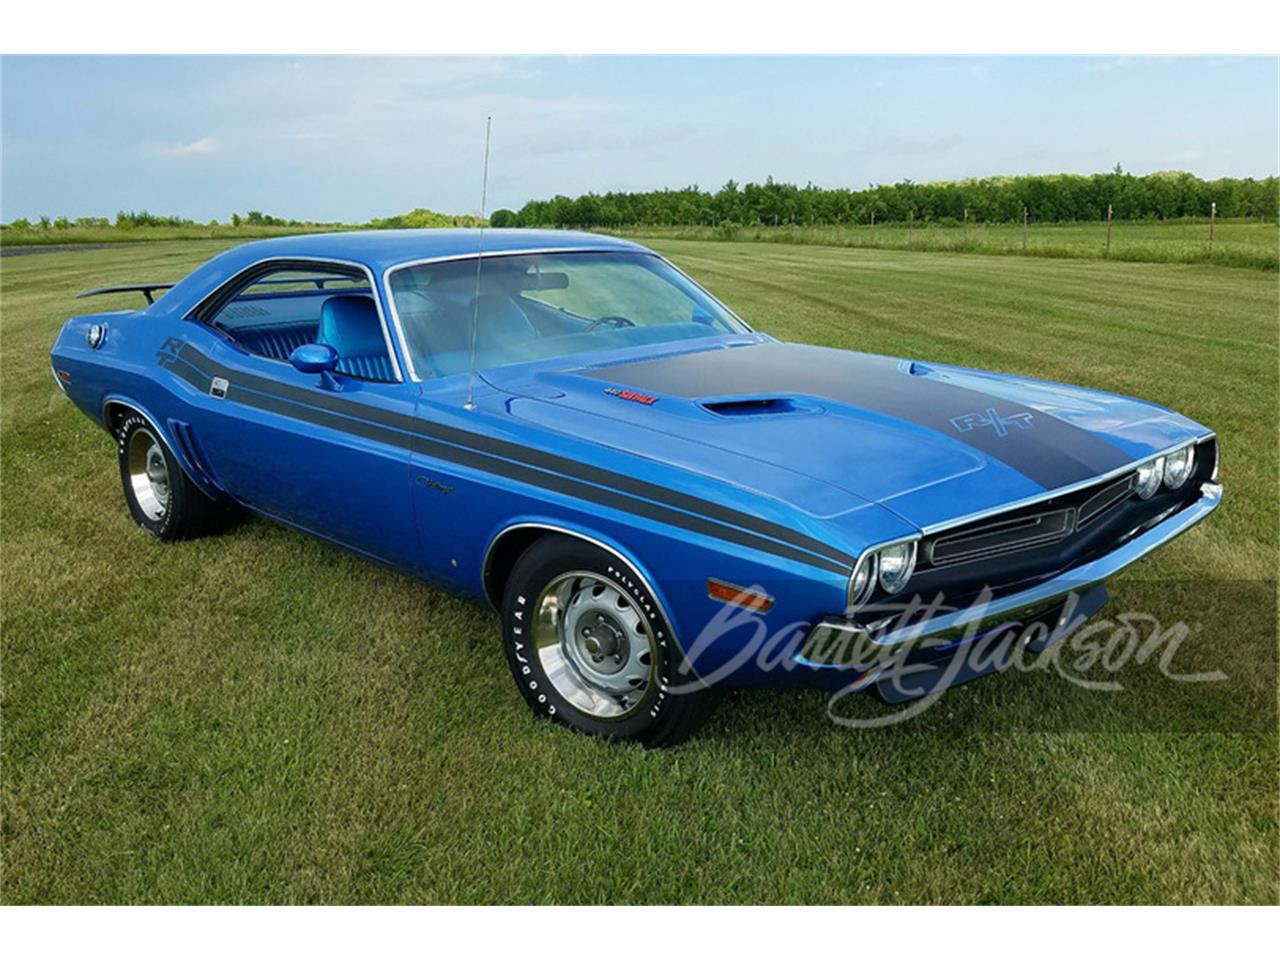 For Sale at Auction: 1971 Dodge Challenger R/T in Scottsdale, Arizona for sale in Scottsdale, AZ